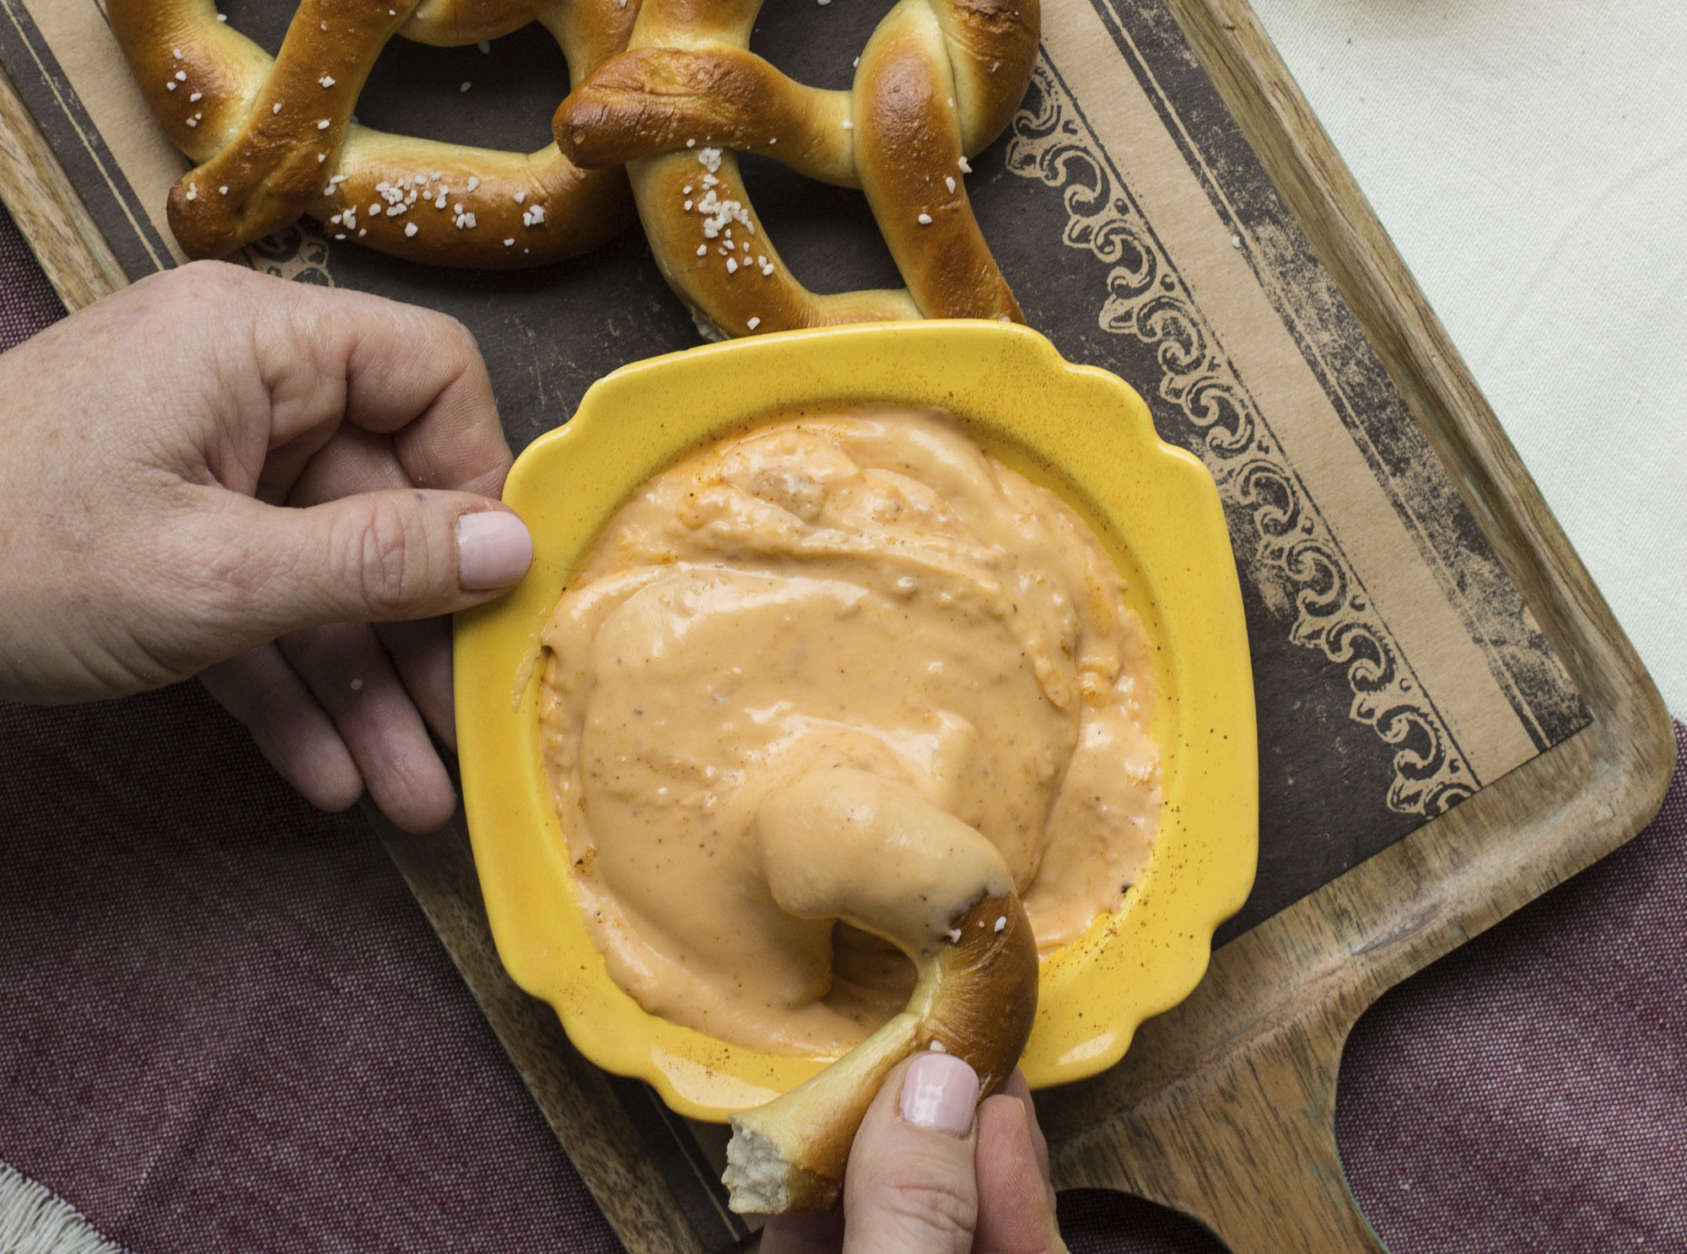 This November 2016 photo shows soft pretzels with hot Cheddar cheese beer dip in New York. This dish is from a recipe by Katie Workman. (Sarah Crowder via AP)